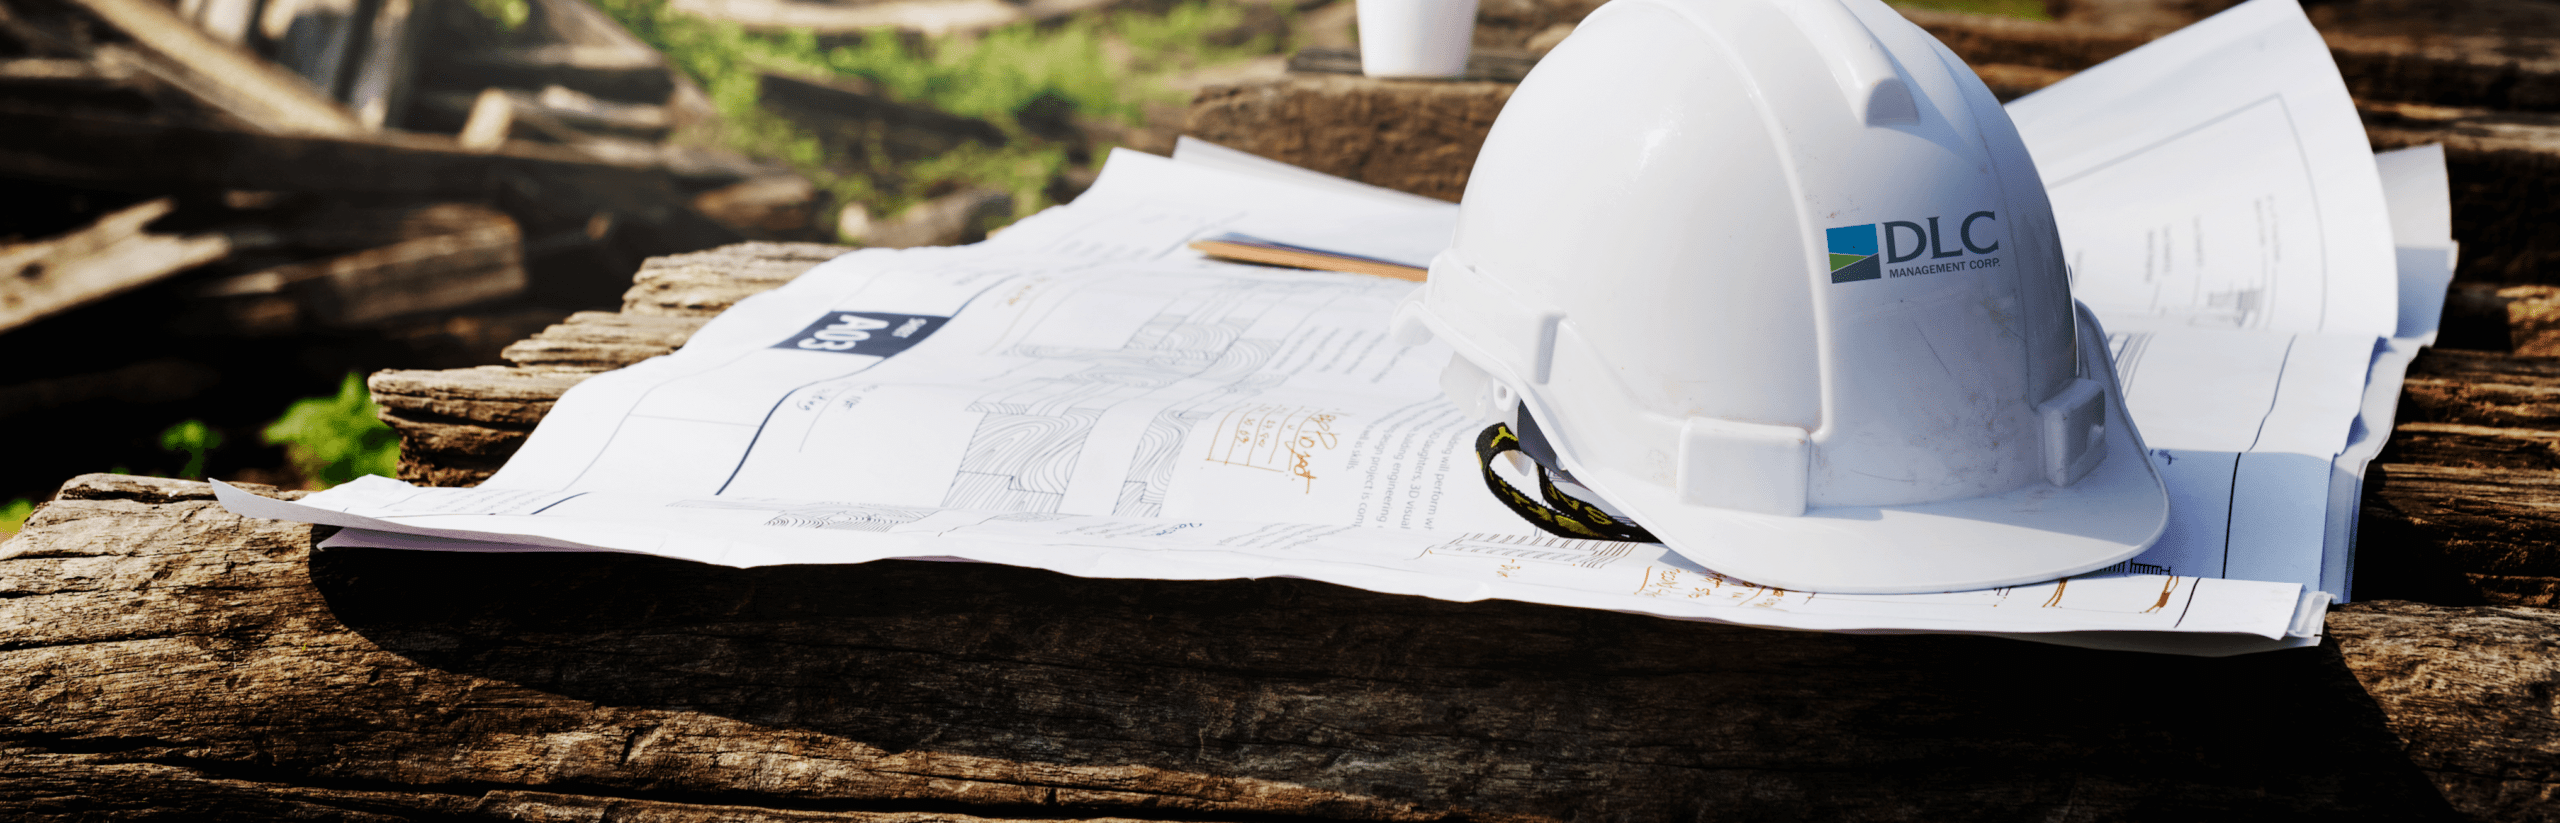 Construction hard hat placed on top of papers